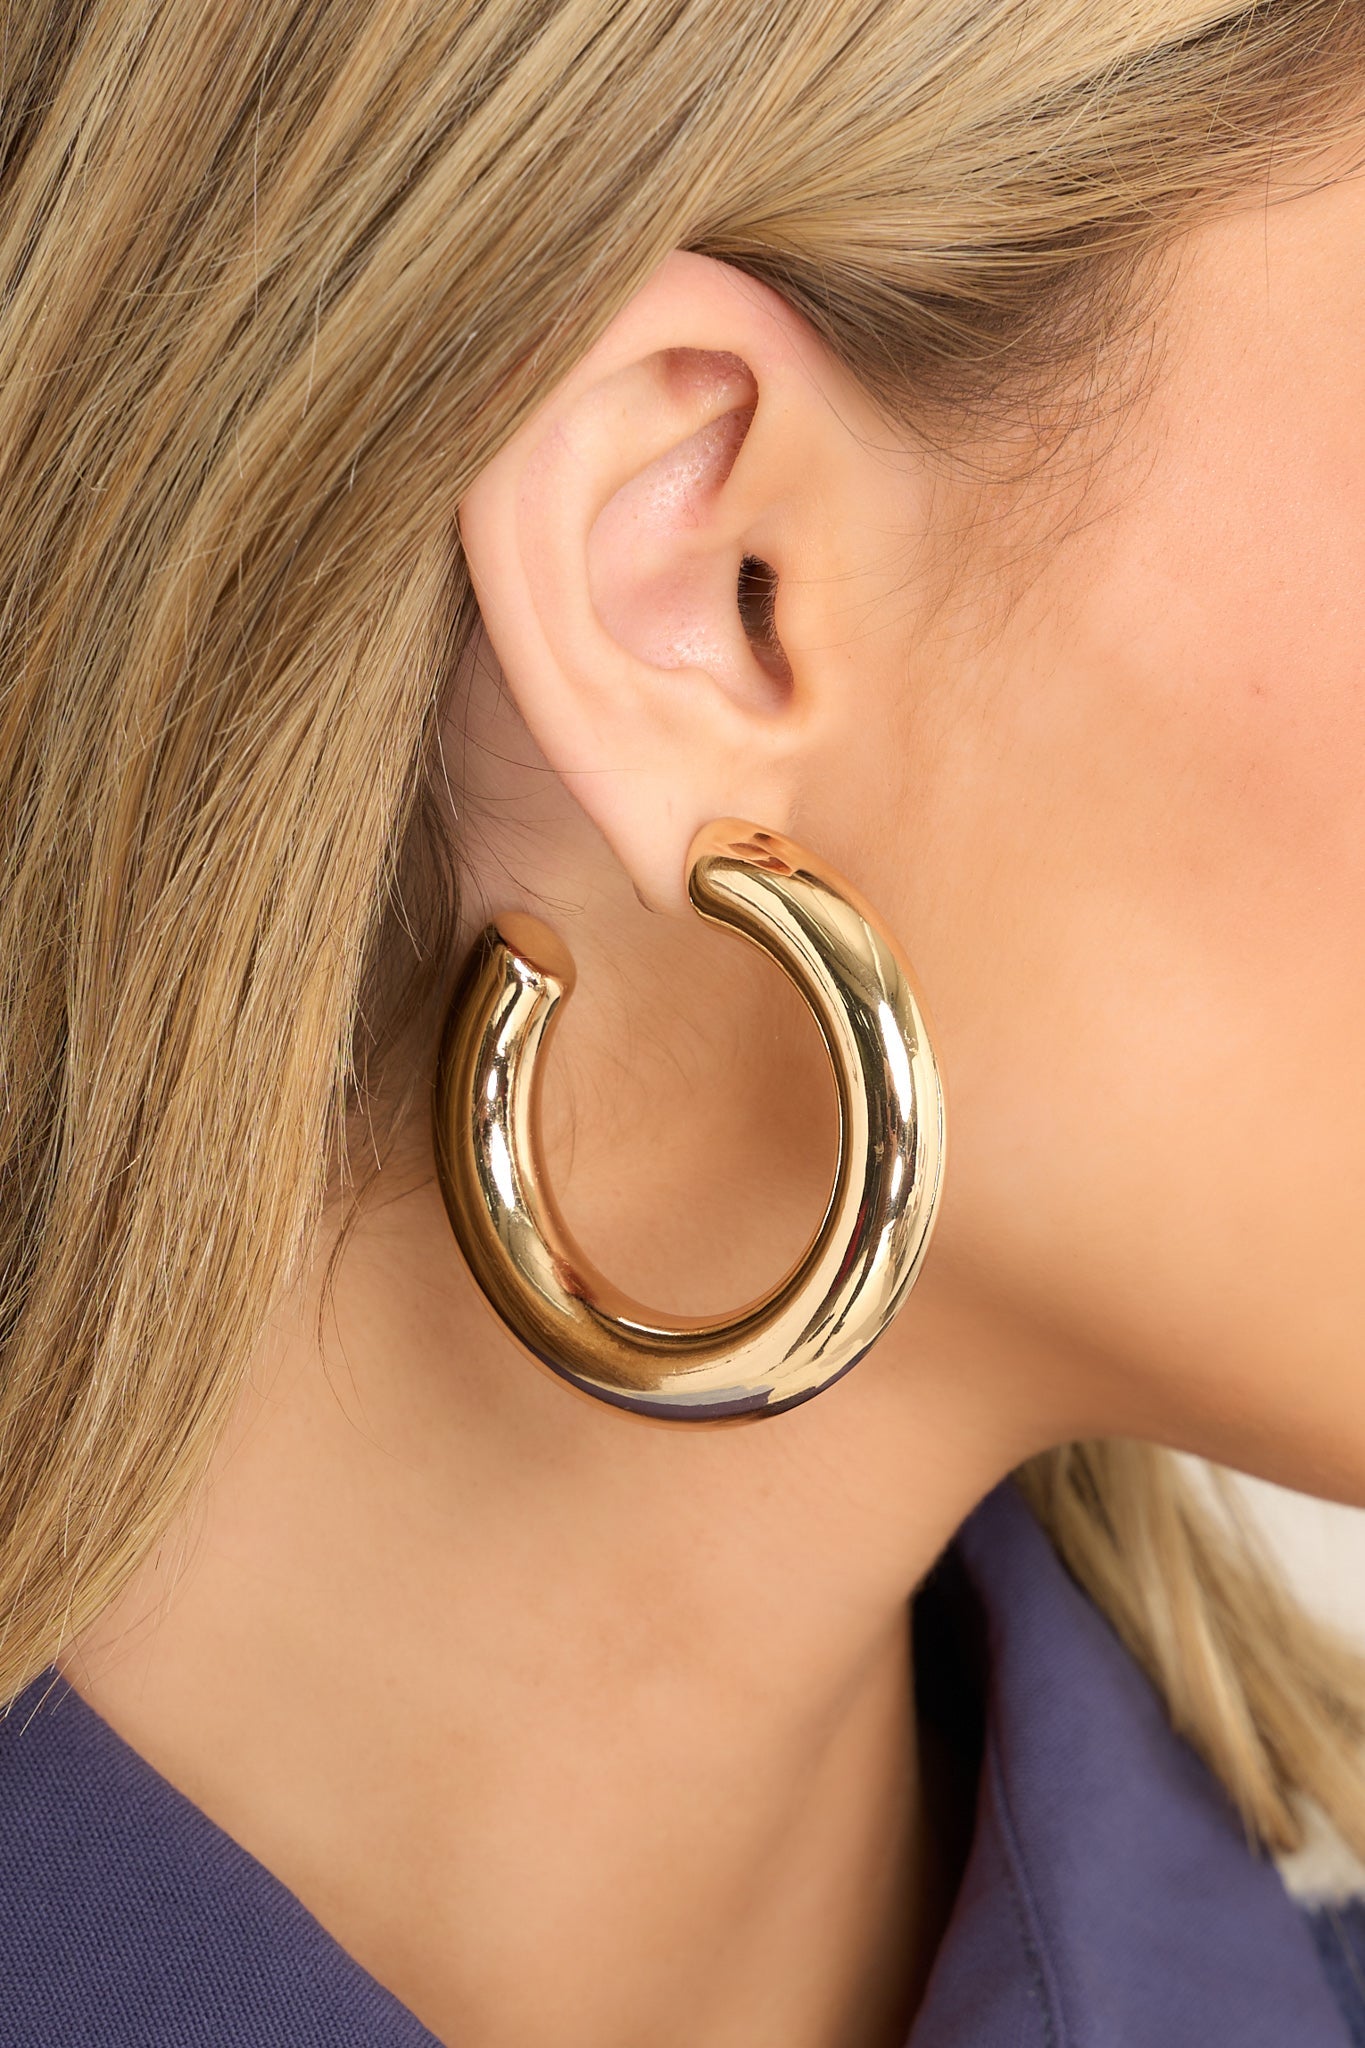 Close-up of a large gold hoop earring with an open circular design. The earring features a smooth, polished surface that reflects light.